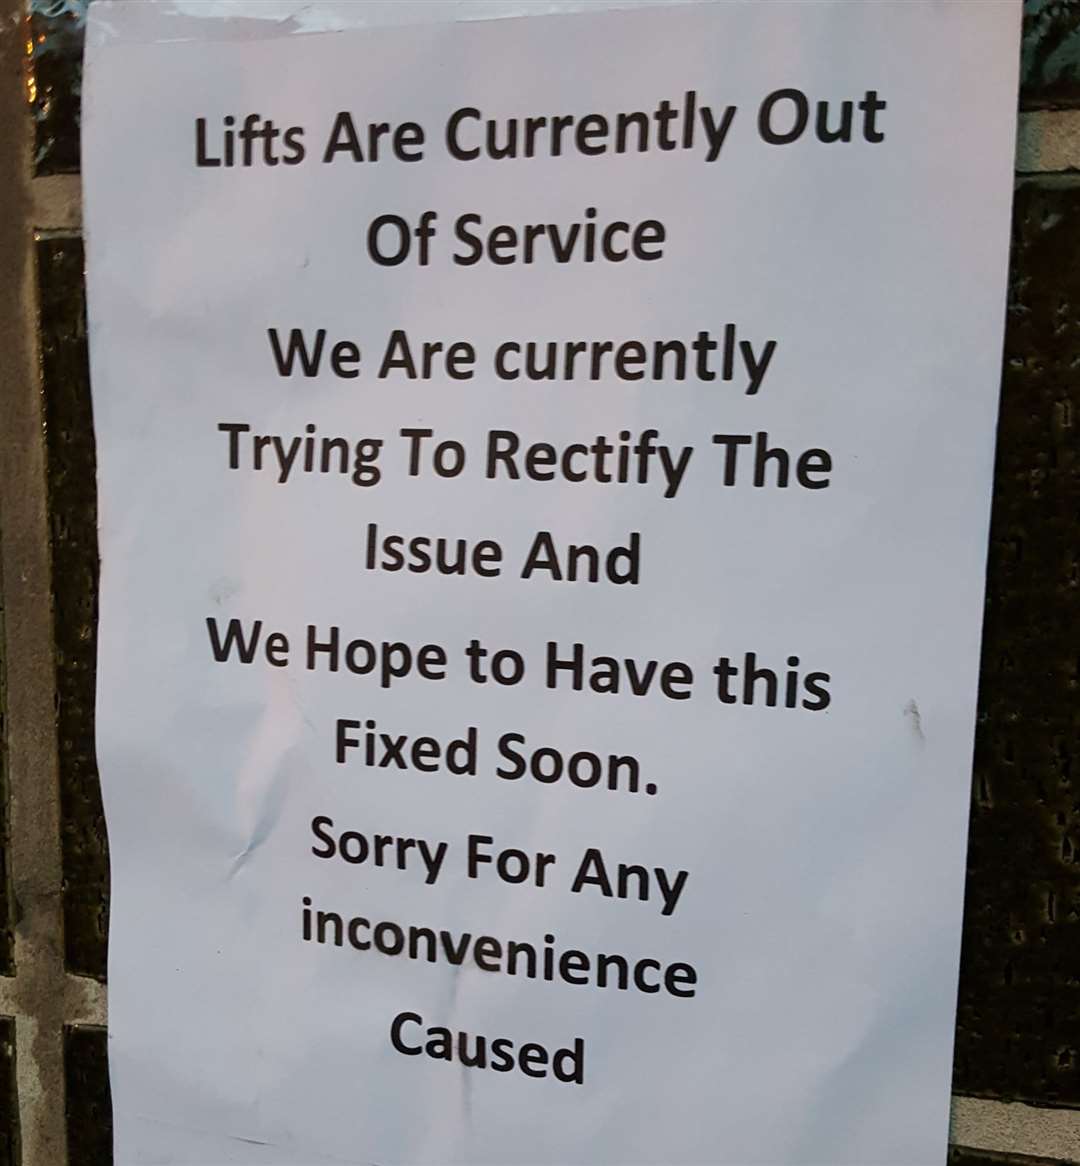 The lifts have broken down more than 50 times in the last two years